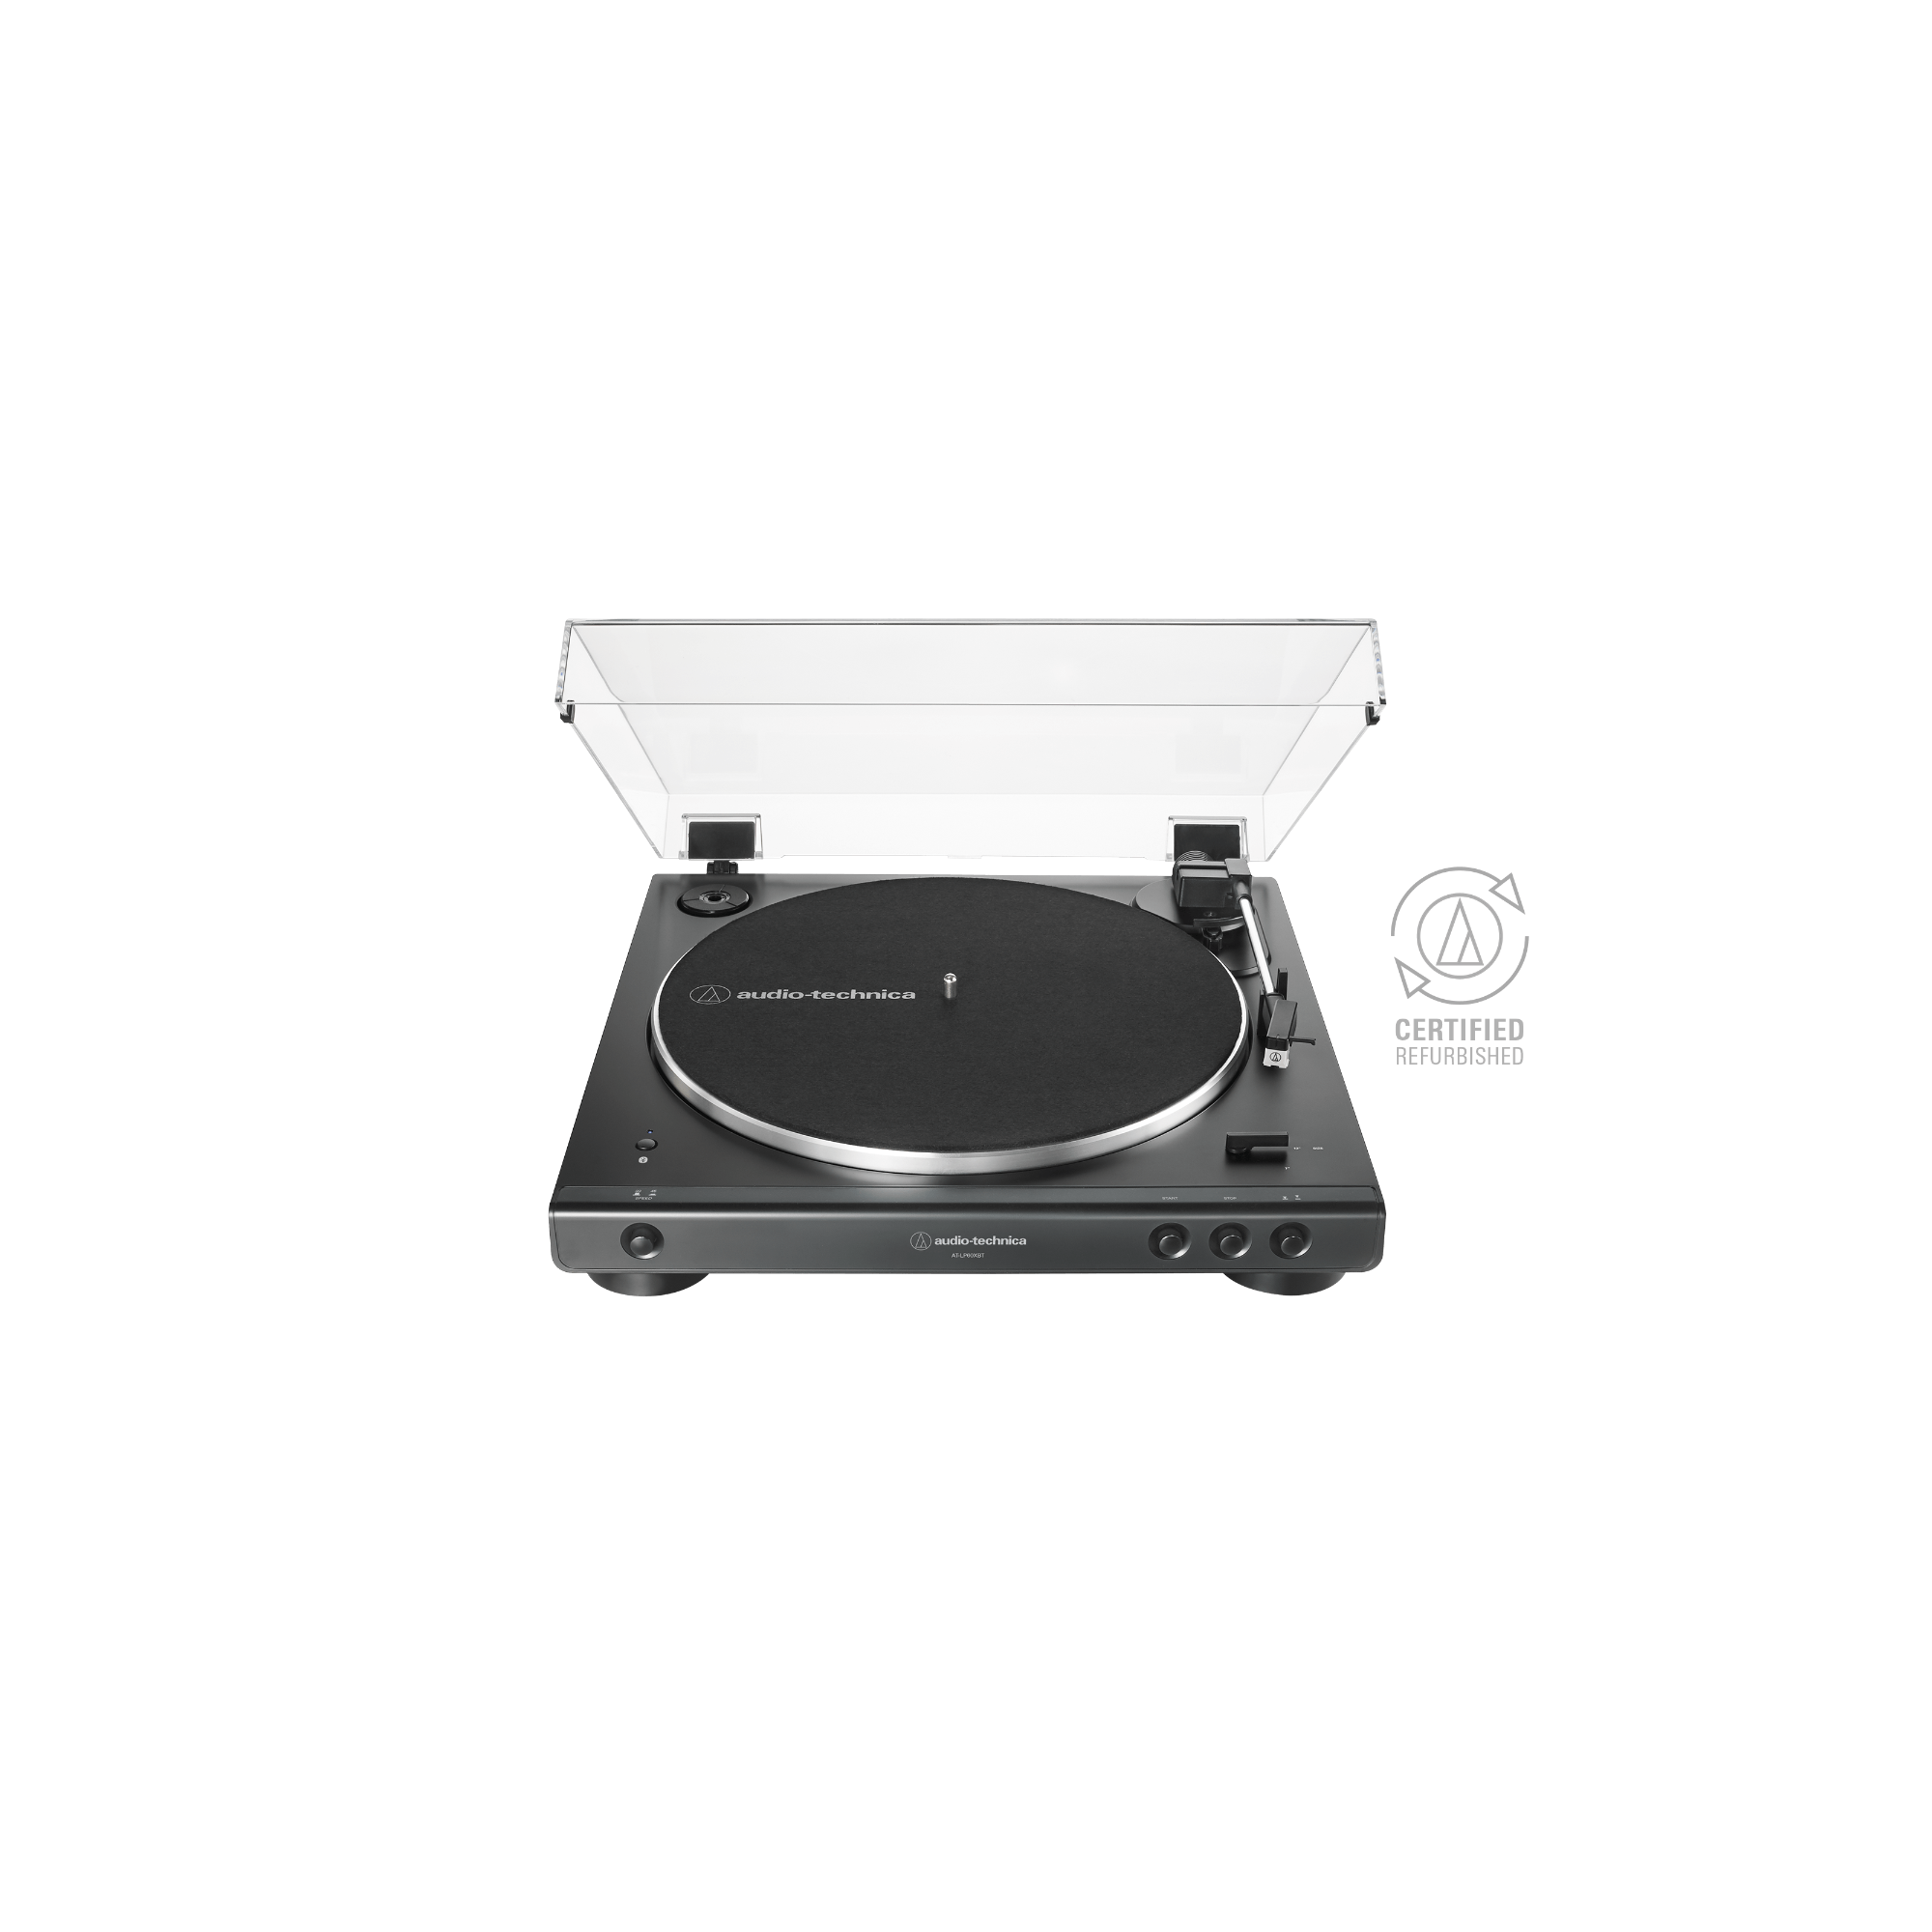 AT-LP60XBT Fully Automatic Wireless Belt-Drive Turntable